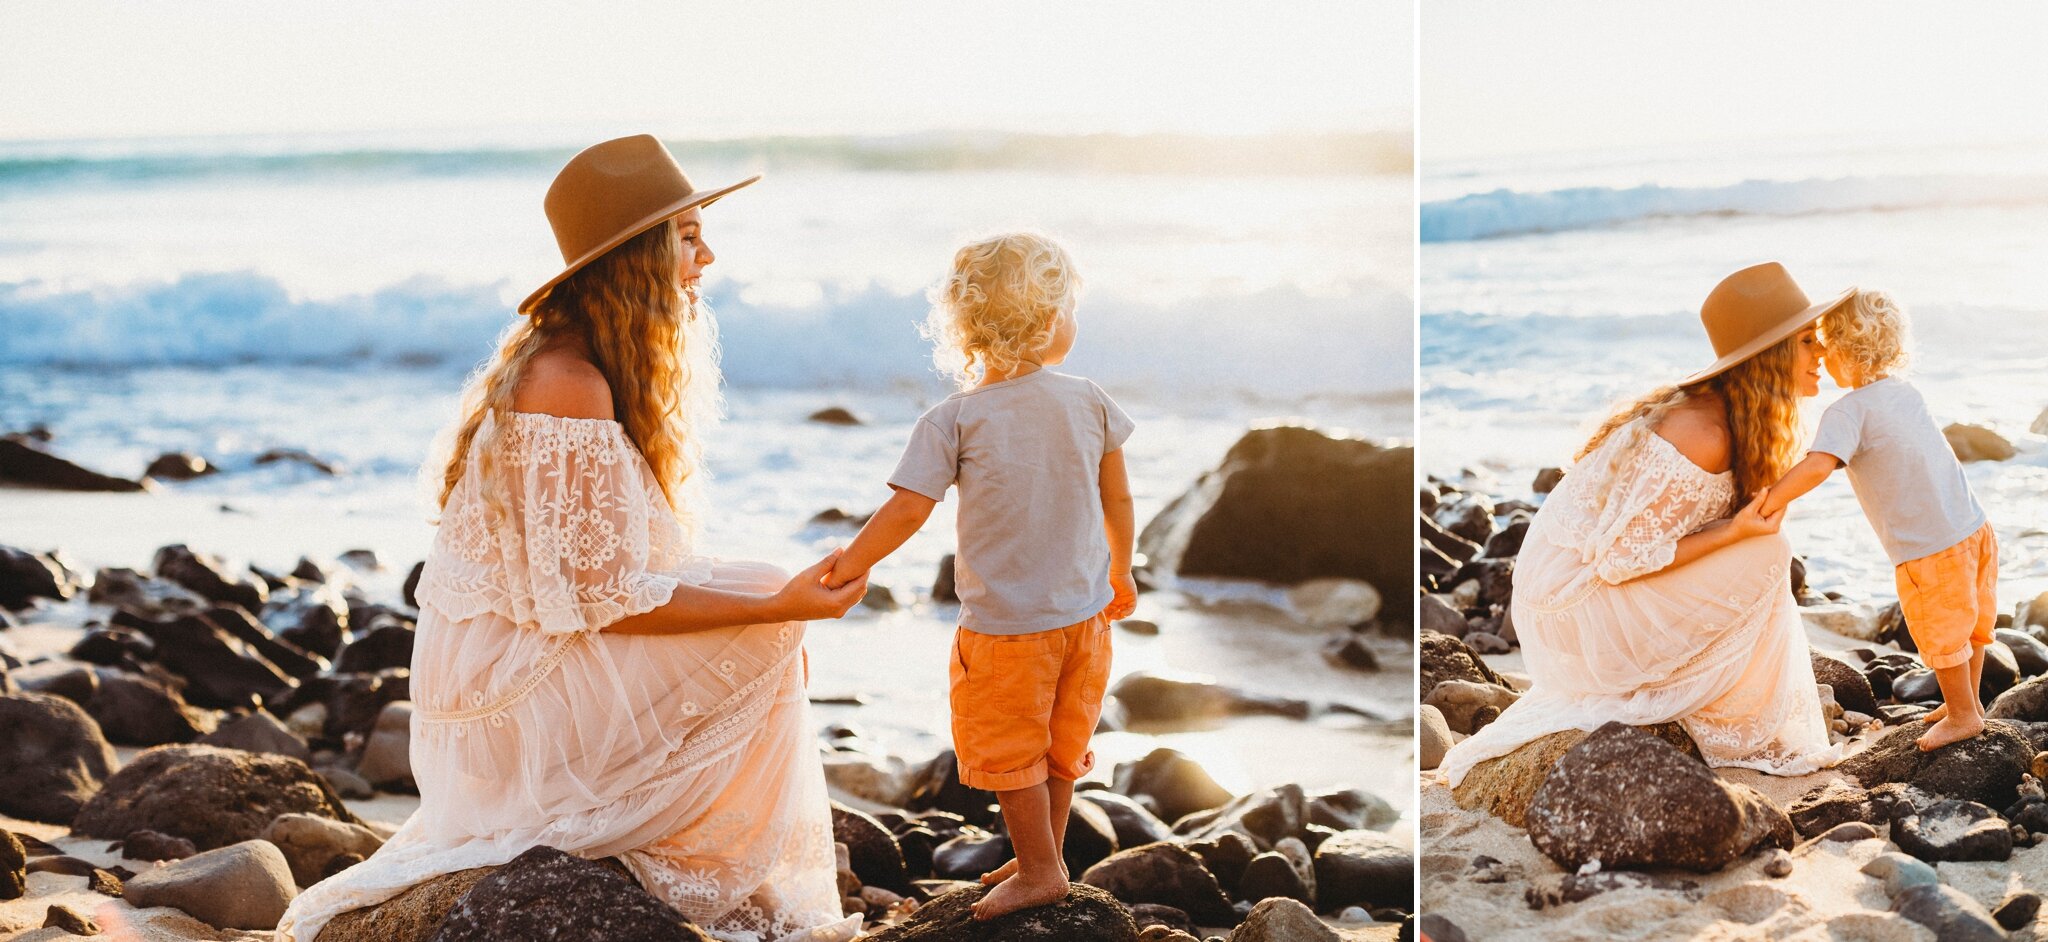 Mommy and me sunset photography Session at Electric Beach, Kapolei - Oahu, Hawaii Maternity Photographer